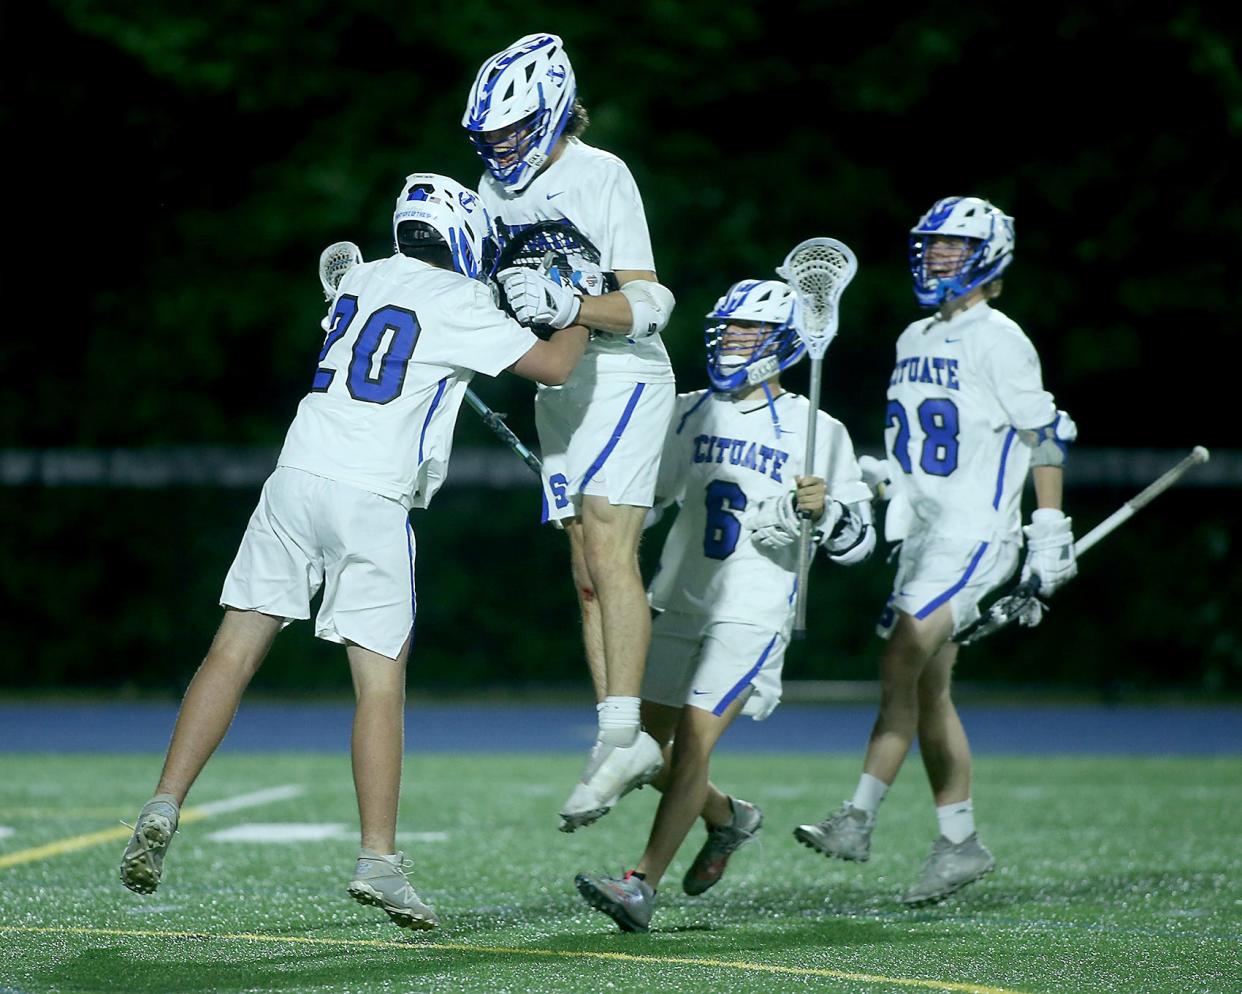 Scituate's Lawson Foley jumps in the arms of Scituate goalie Lydon O'Brien following their 18-3 win over Whitman-Hanson in the Round of 32 of the Division 2 state tournament at Scituate High School on Tuesday, June 7, 2022. 